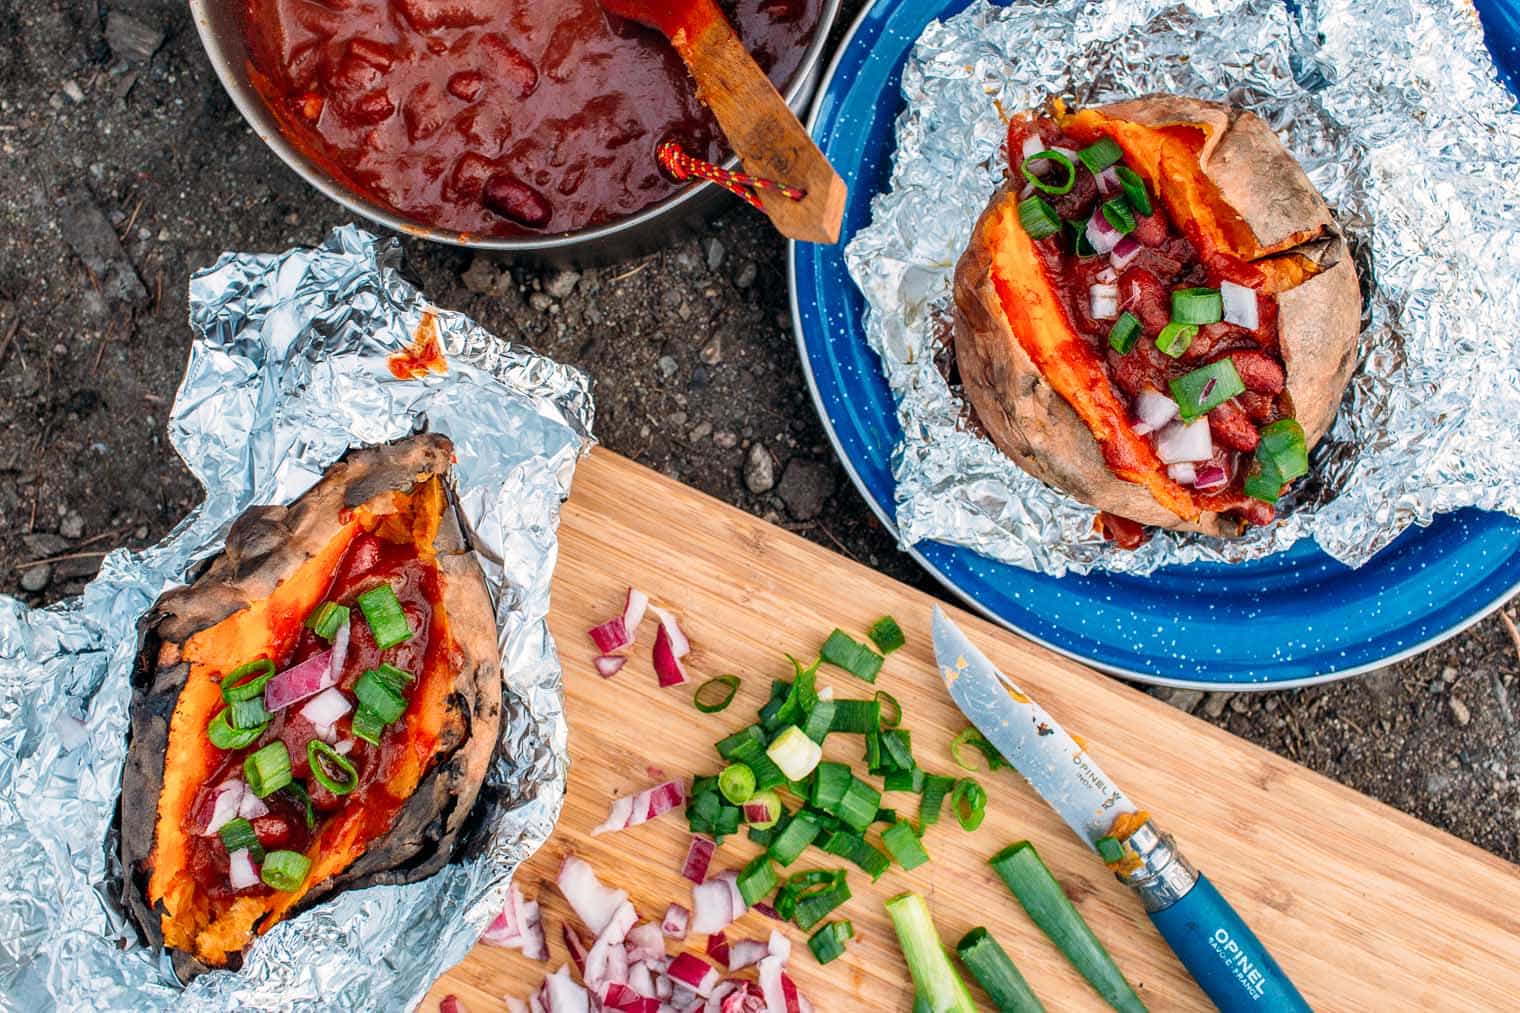 Campfire Baked Sweet Potatoes + Chili | Easy Foil-Wrapped Camping Recipes For Outdoor Meals